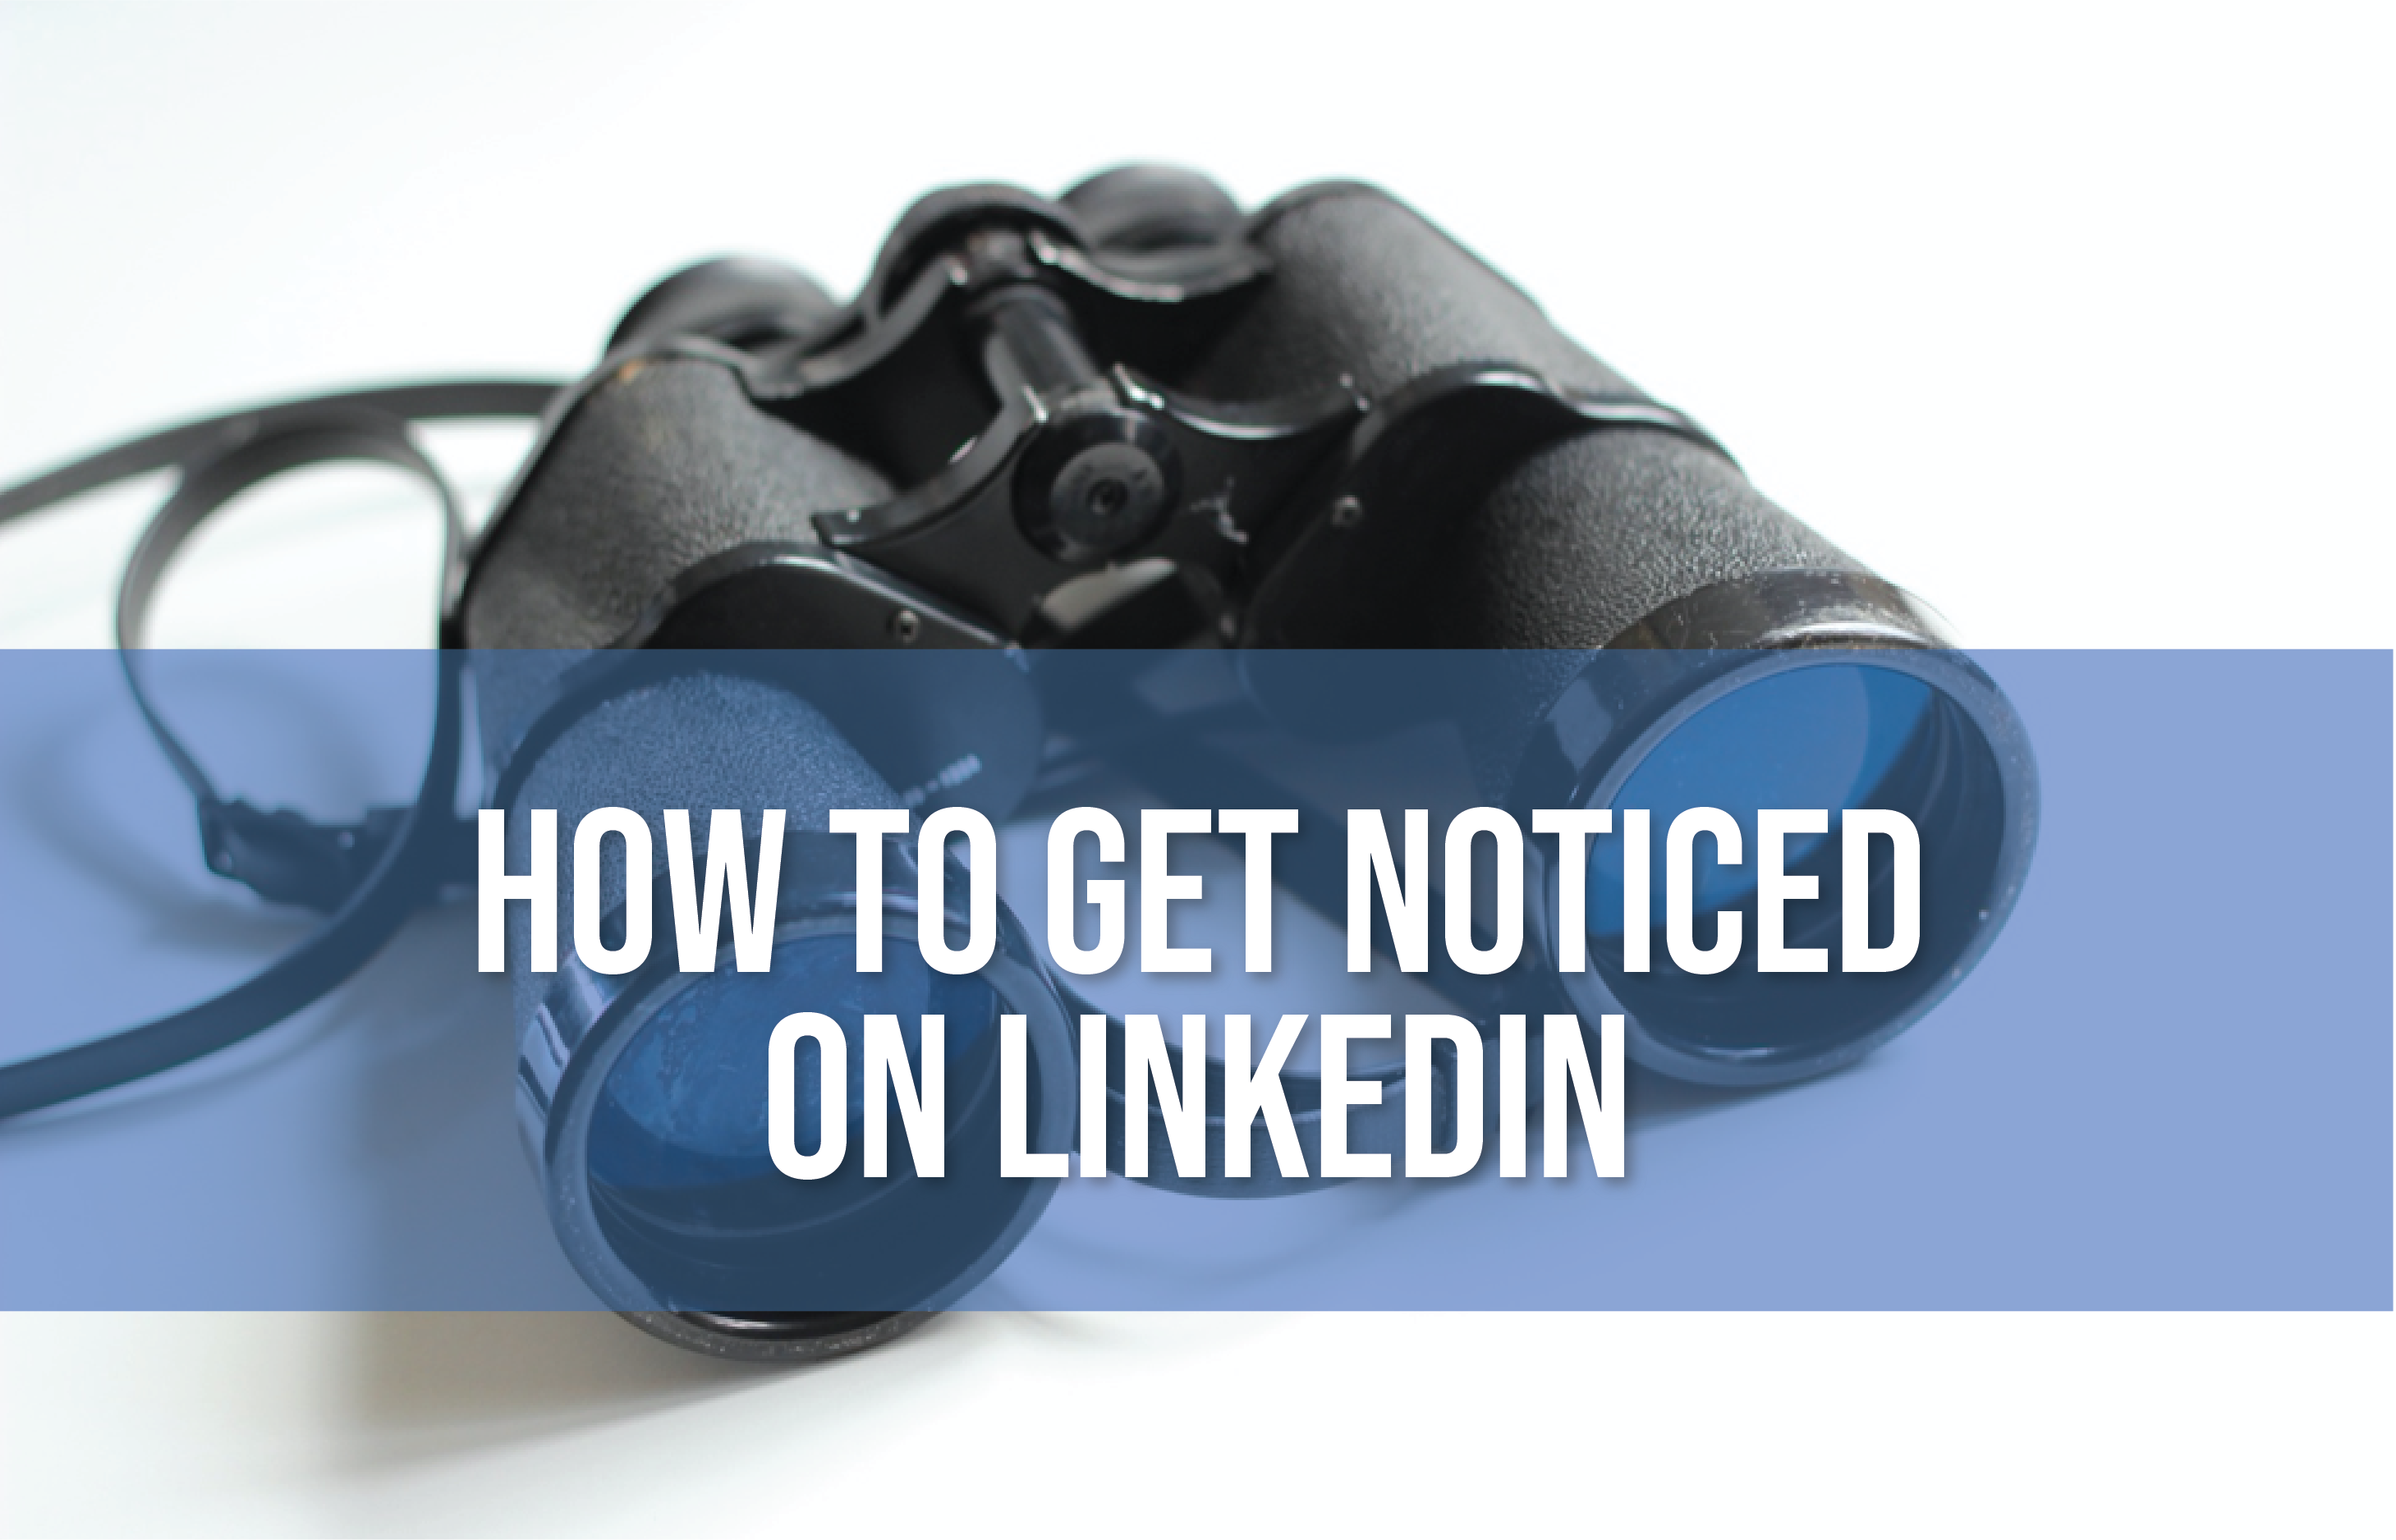 How to get noticed on LinkedIn